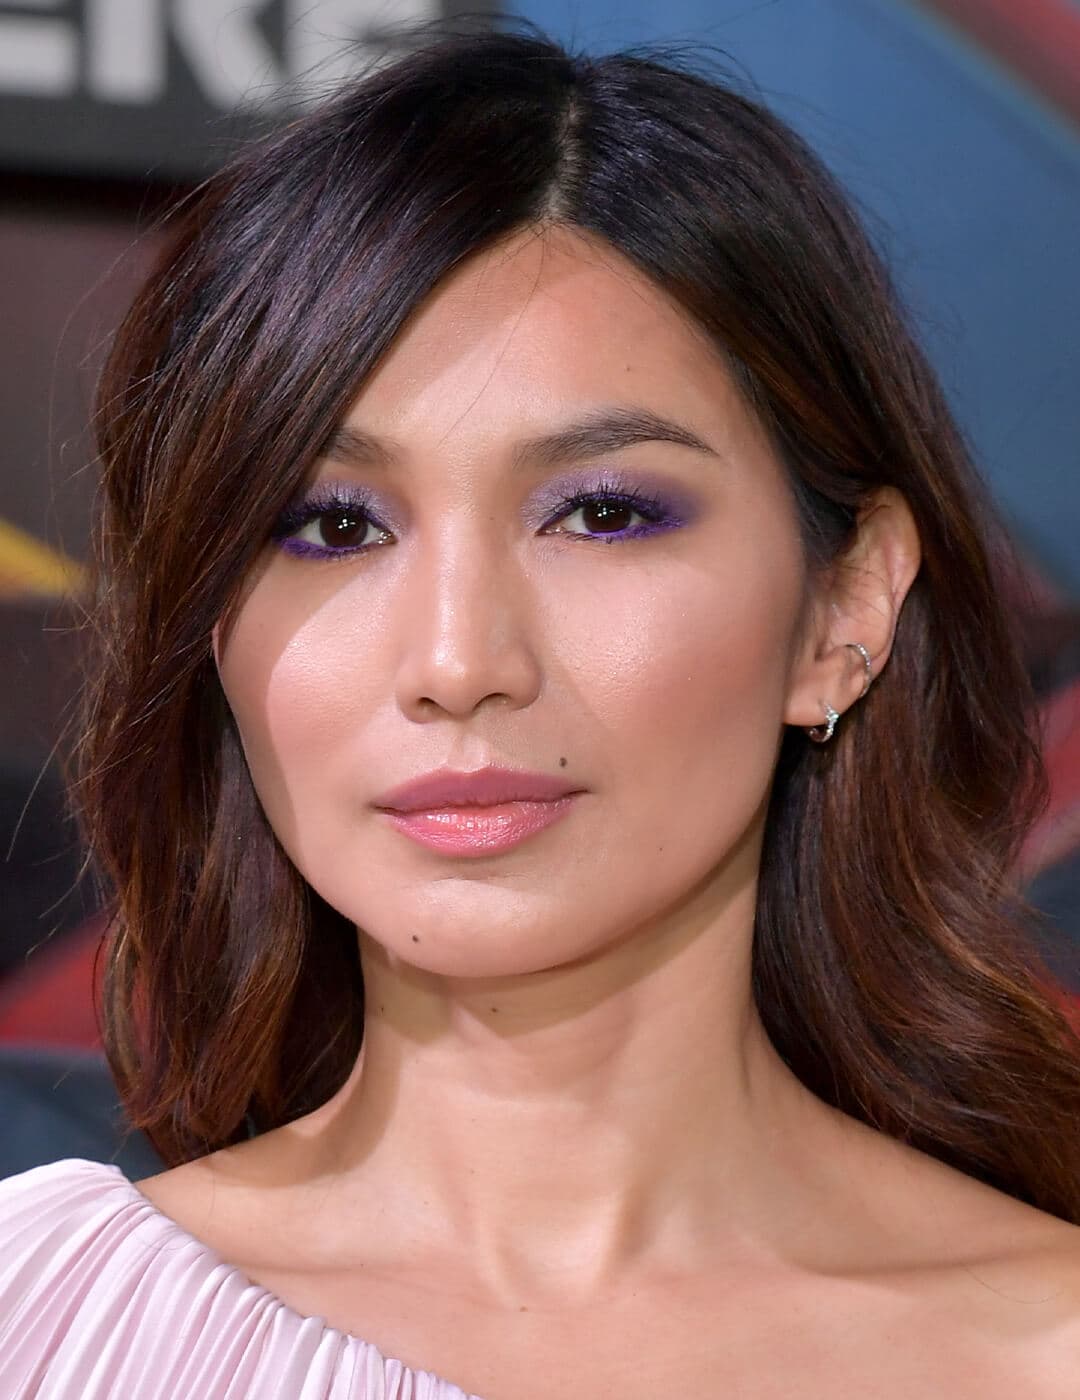 Gemma Chan rocking a lavender eye makeup look on the red carpet